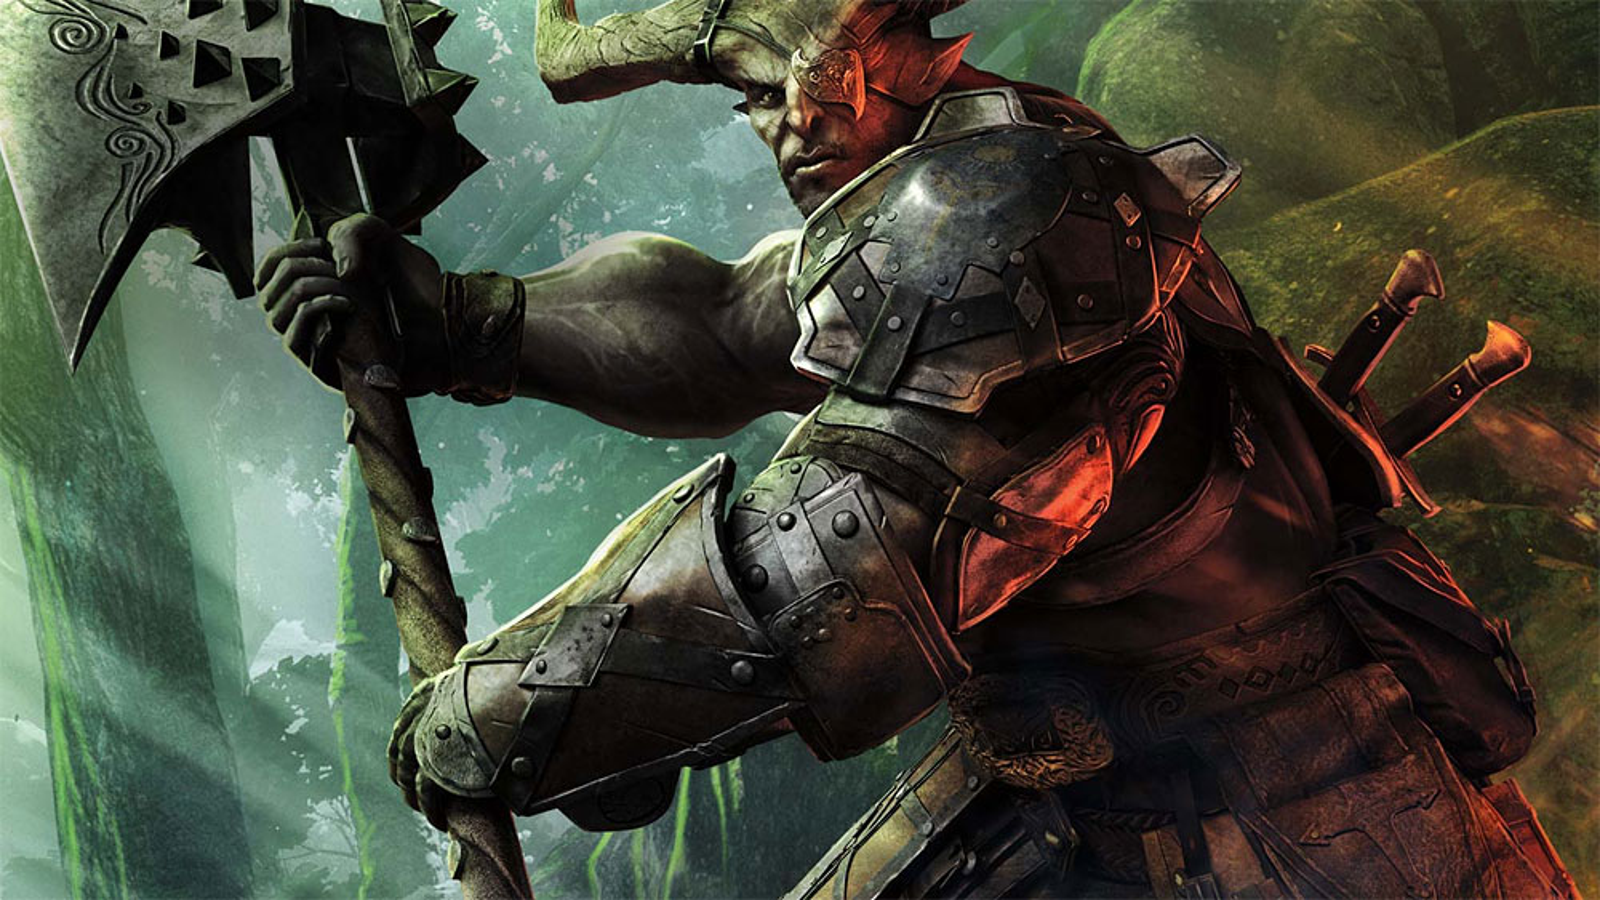 I Played 3 Hours of Dragon Age: Inquisition and It's Awesome